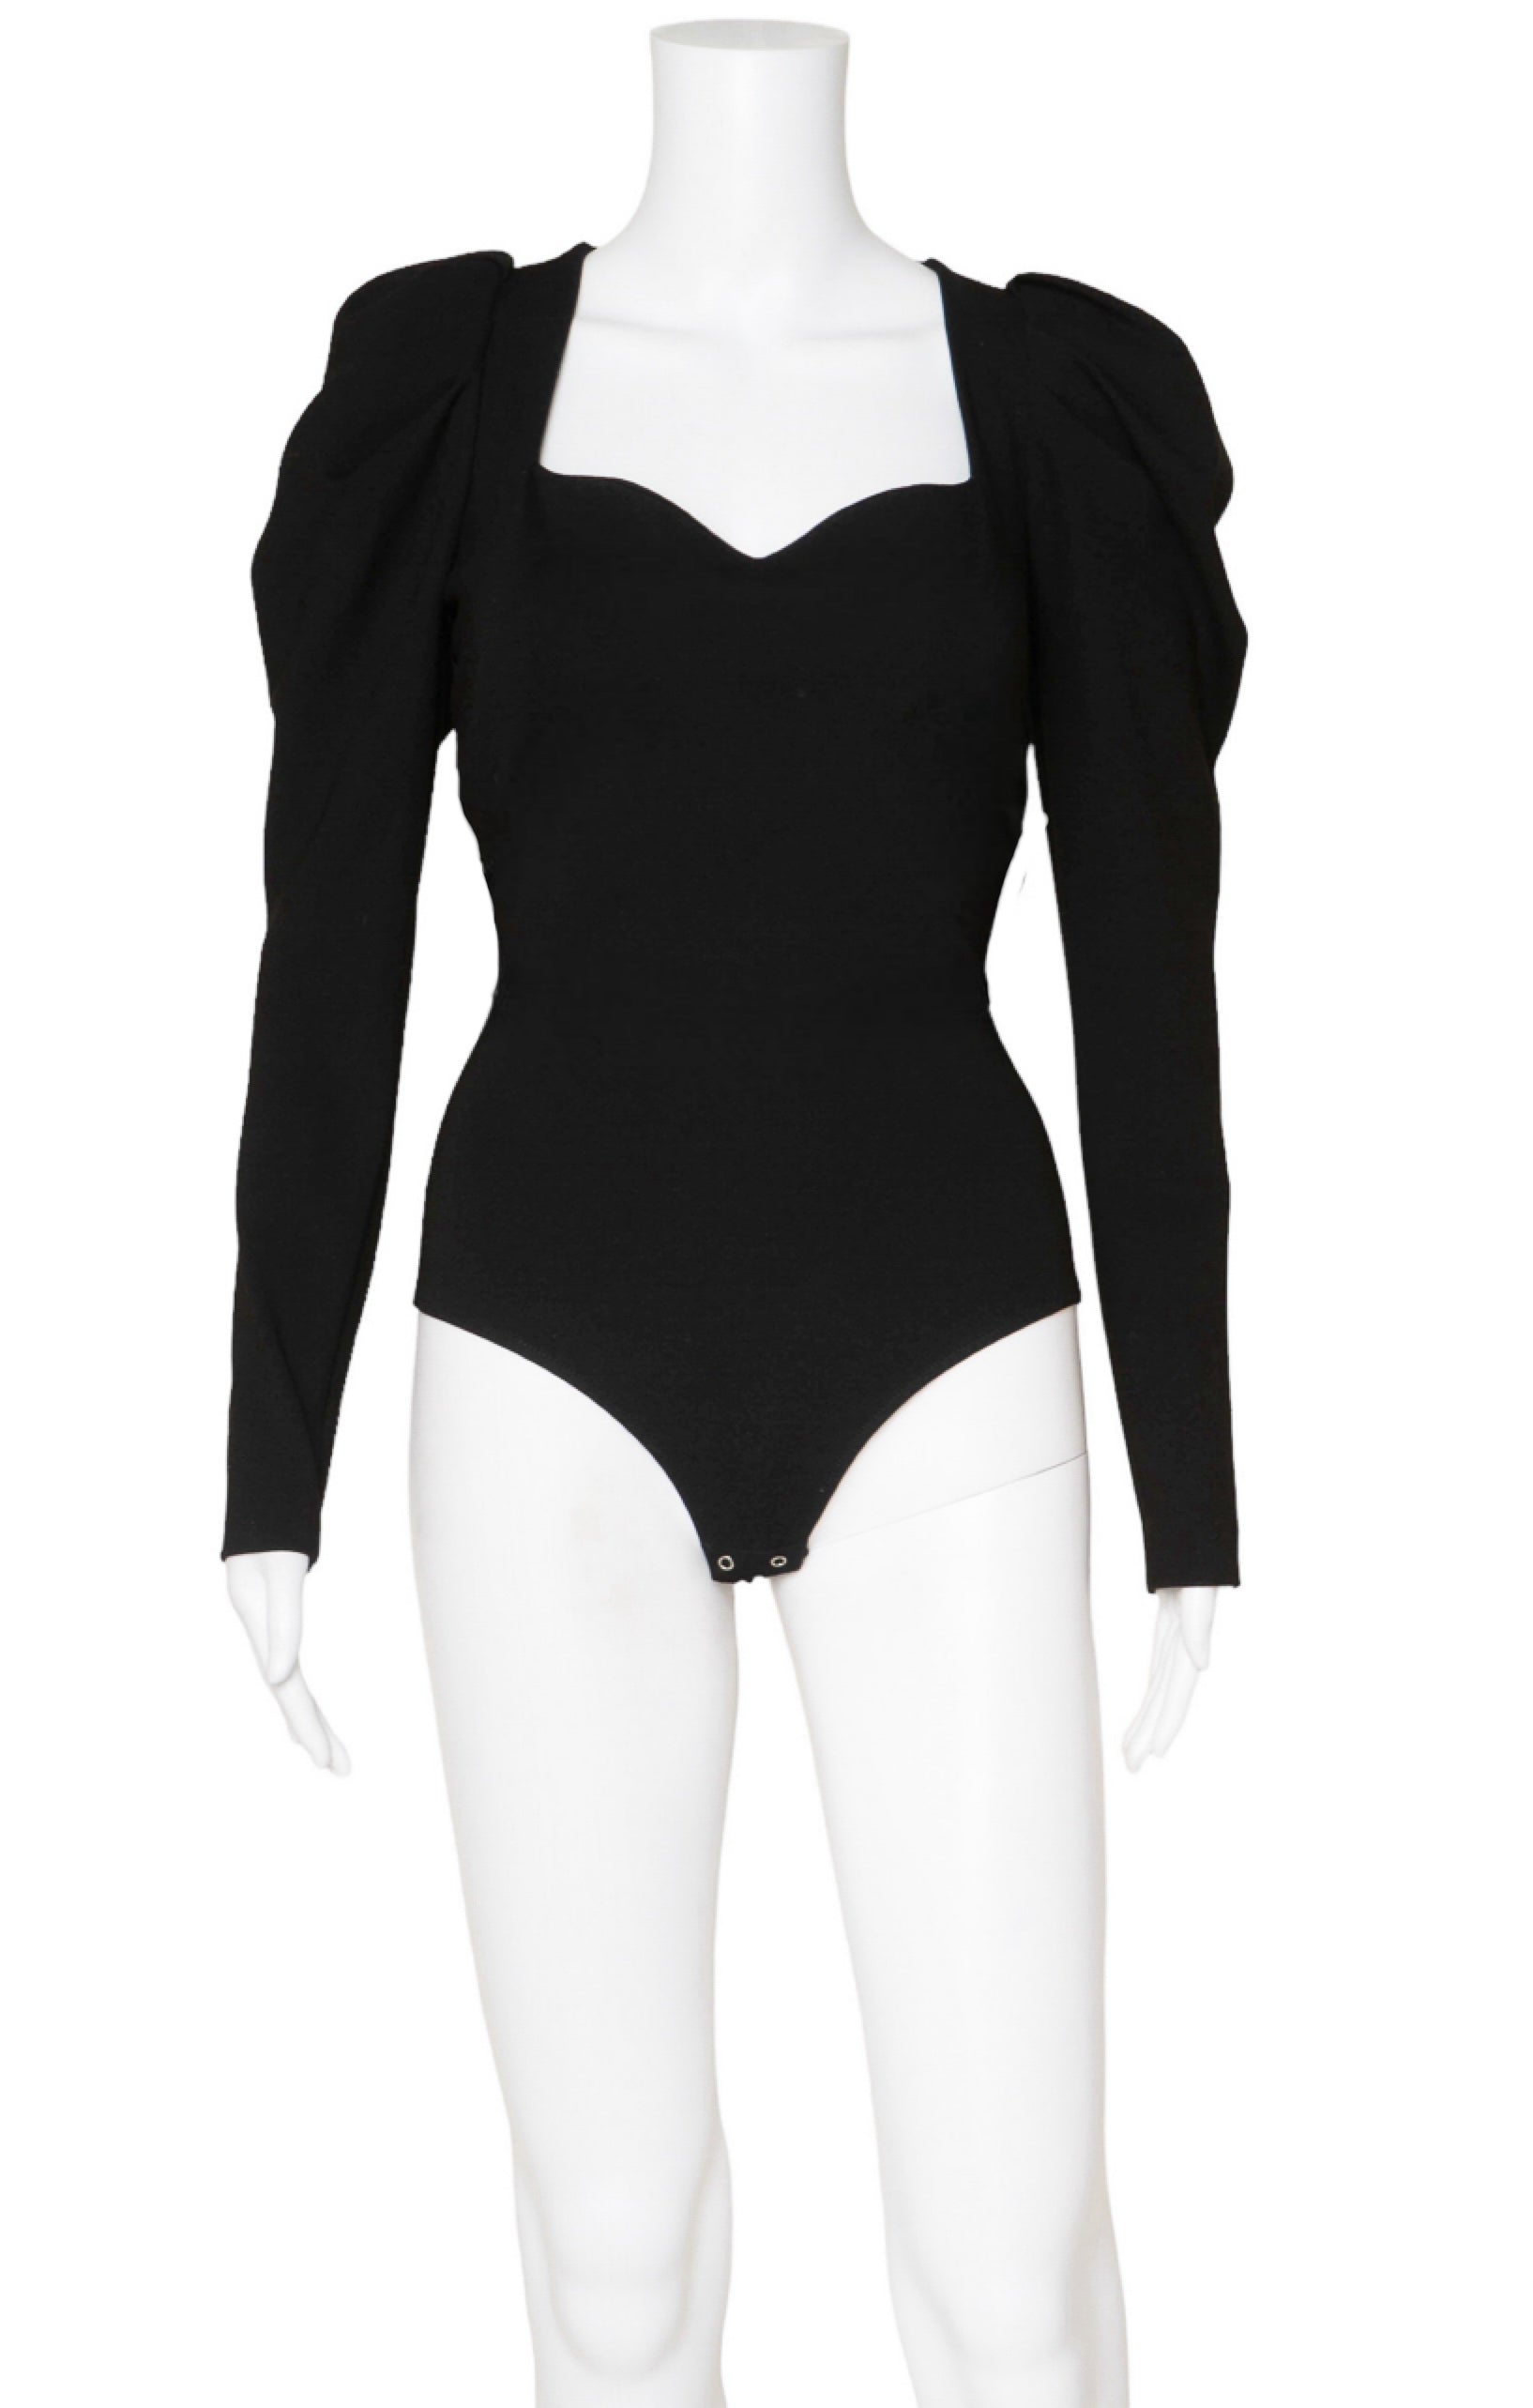 ALEXANDER MCQUEEN Bodysuit Size: IT 44 / Comparable to US 8